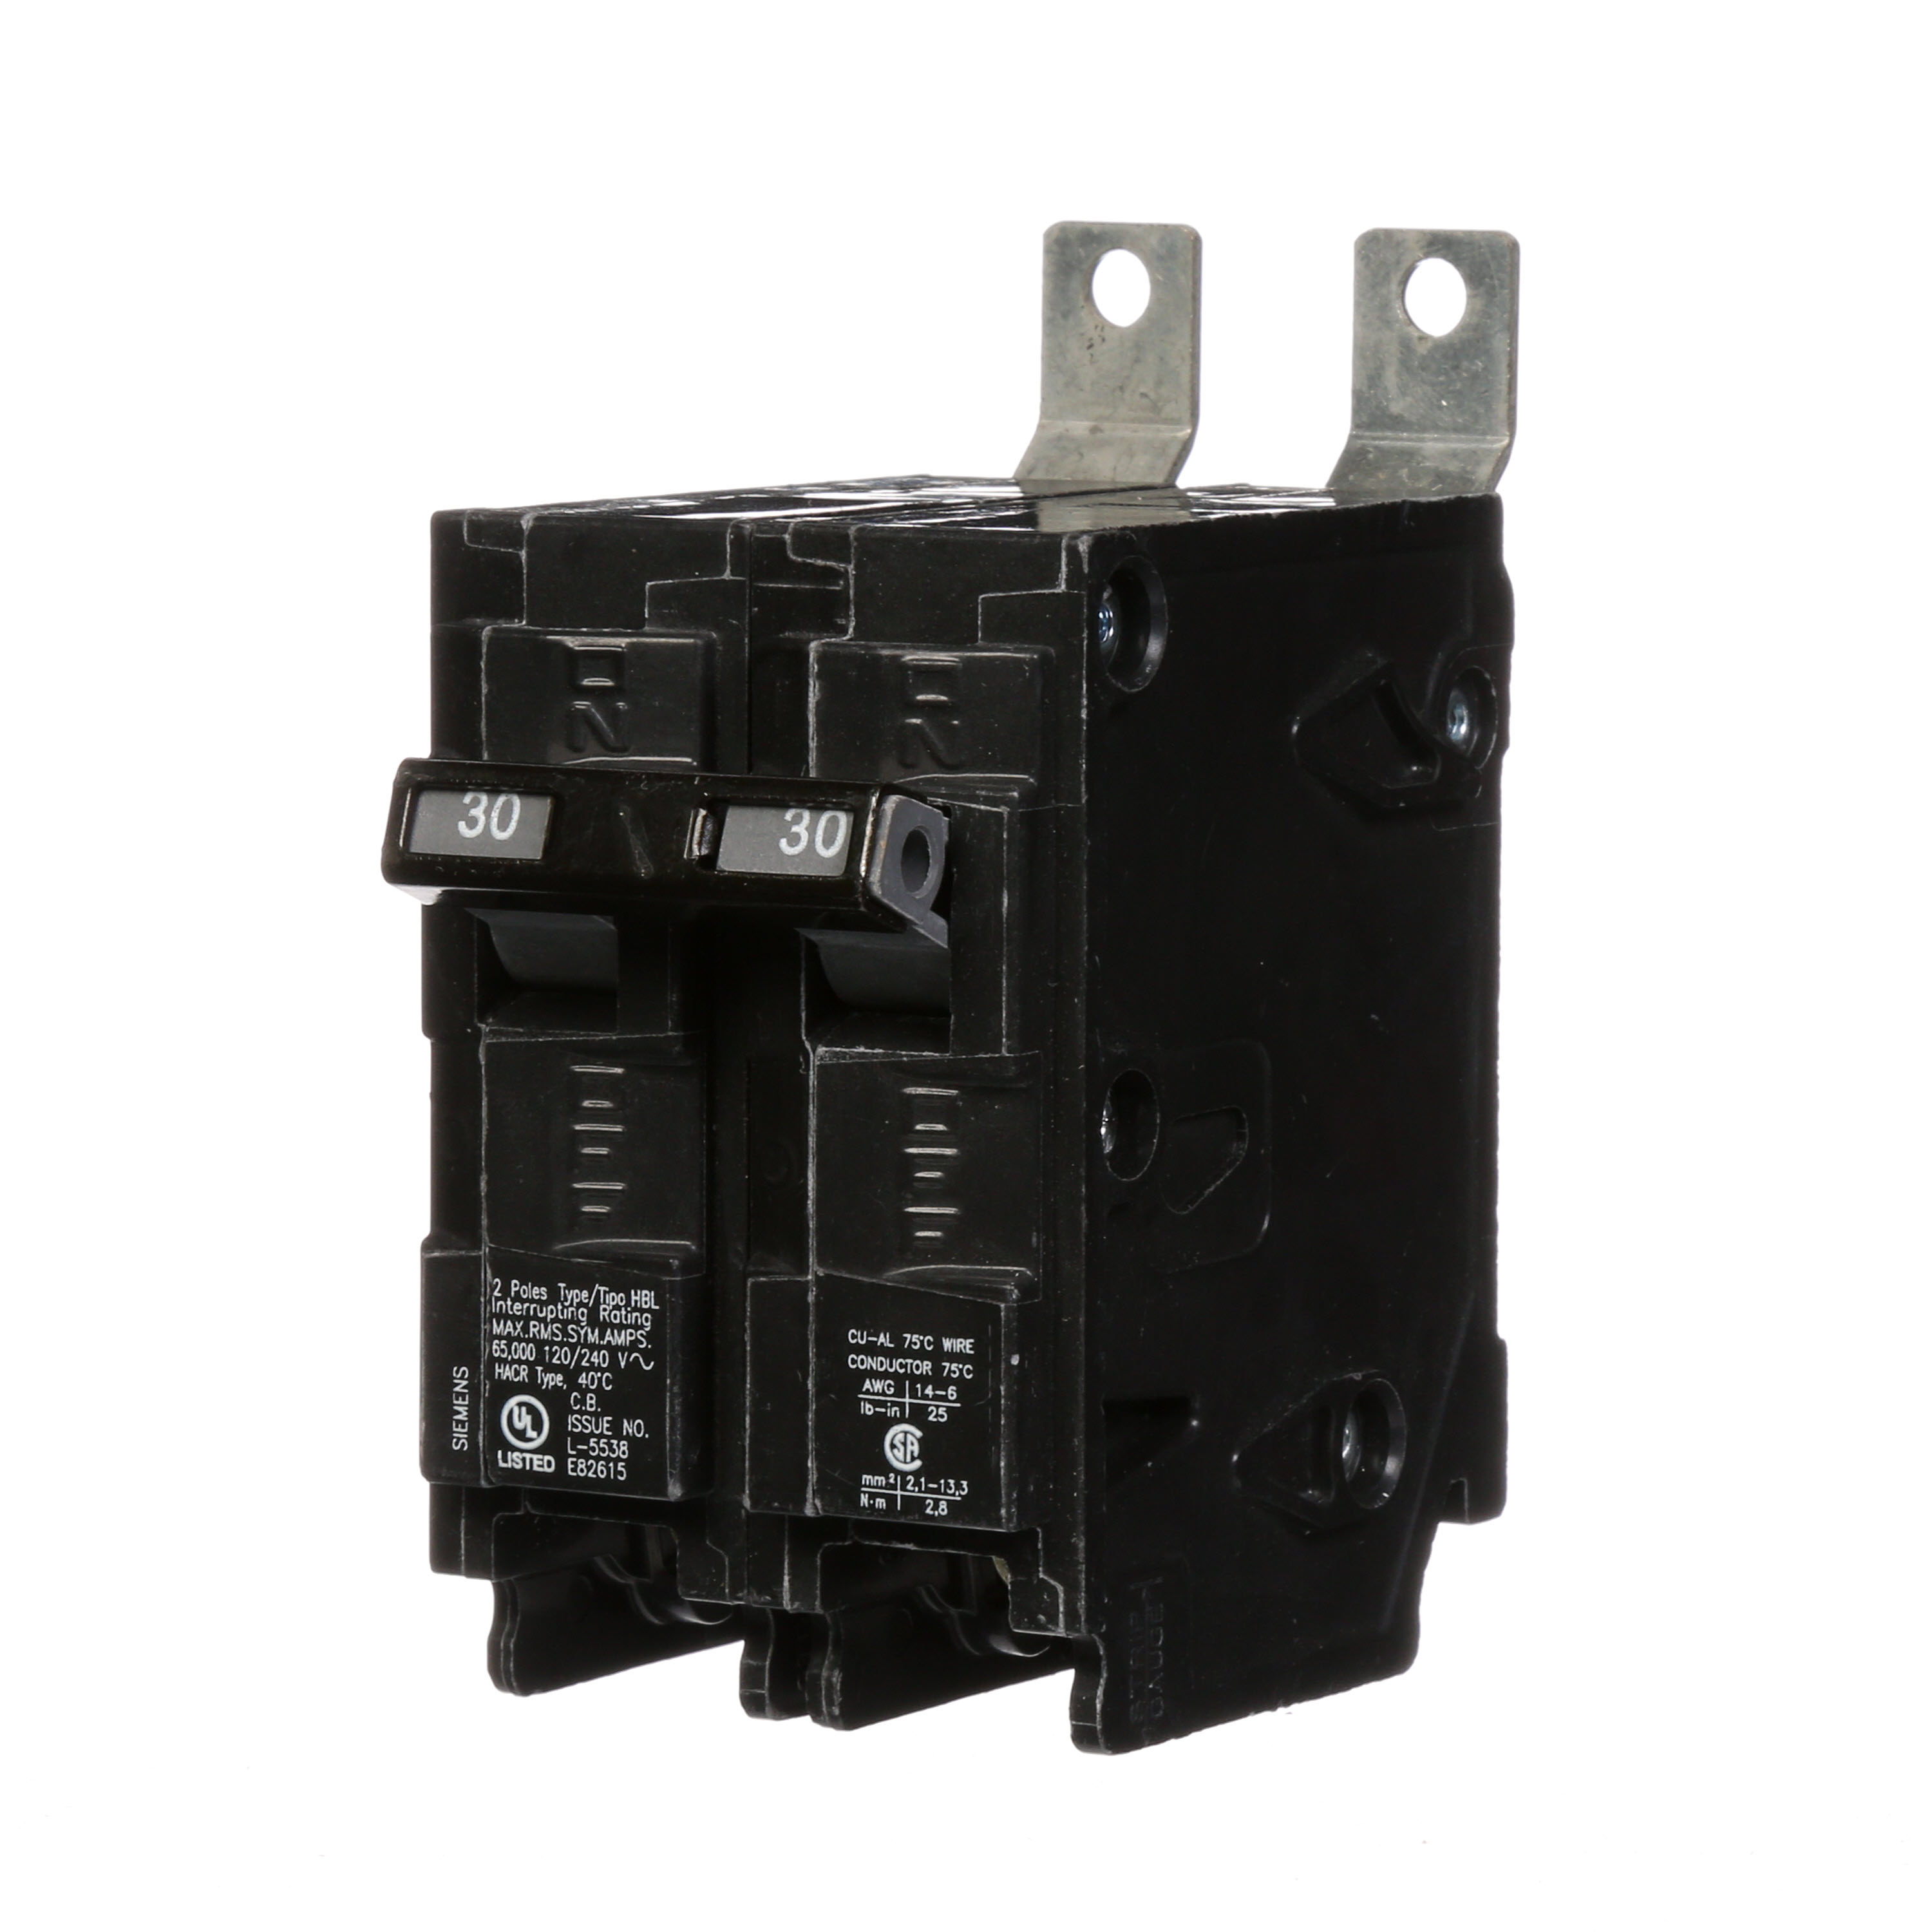 Siemens Low Voltage Molded Case Circuit Breakers Panelboard Mounting 240V Circuit Breakers - Type BL, 2-Pole, 120/240VAC are Circuit Protection Molded Case Circuit Breakers. Type HBL Application Electrical Distribution Standard UL 489 Voltage Rating 120/240V A mperage Rating 30A Trip Range Thermal Magnetic Interrupt Rating 65 AIC Number Of Poles 2P